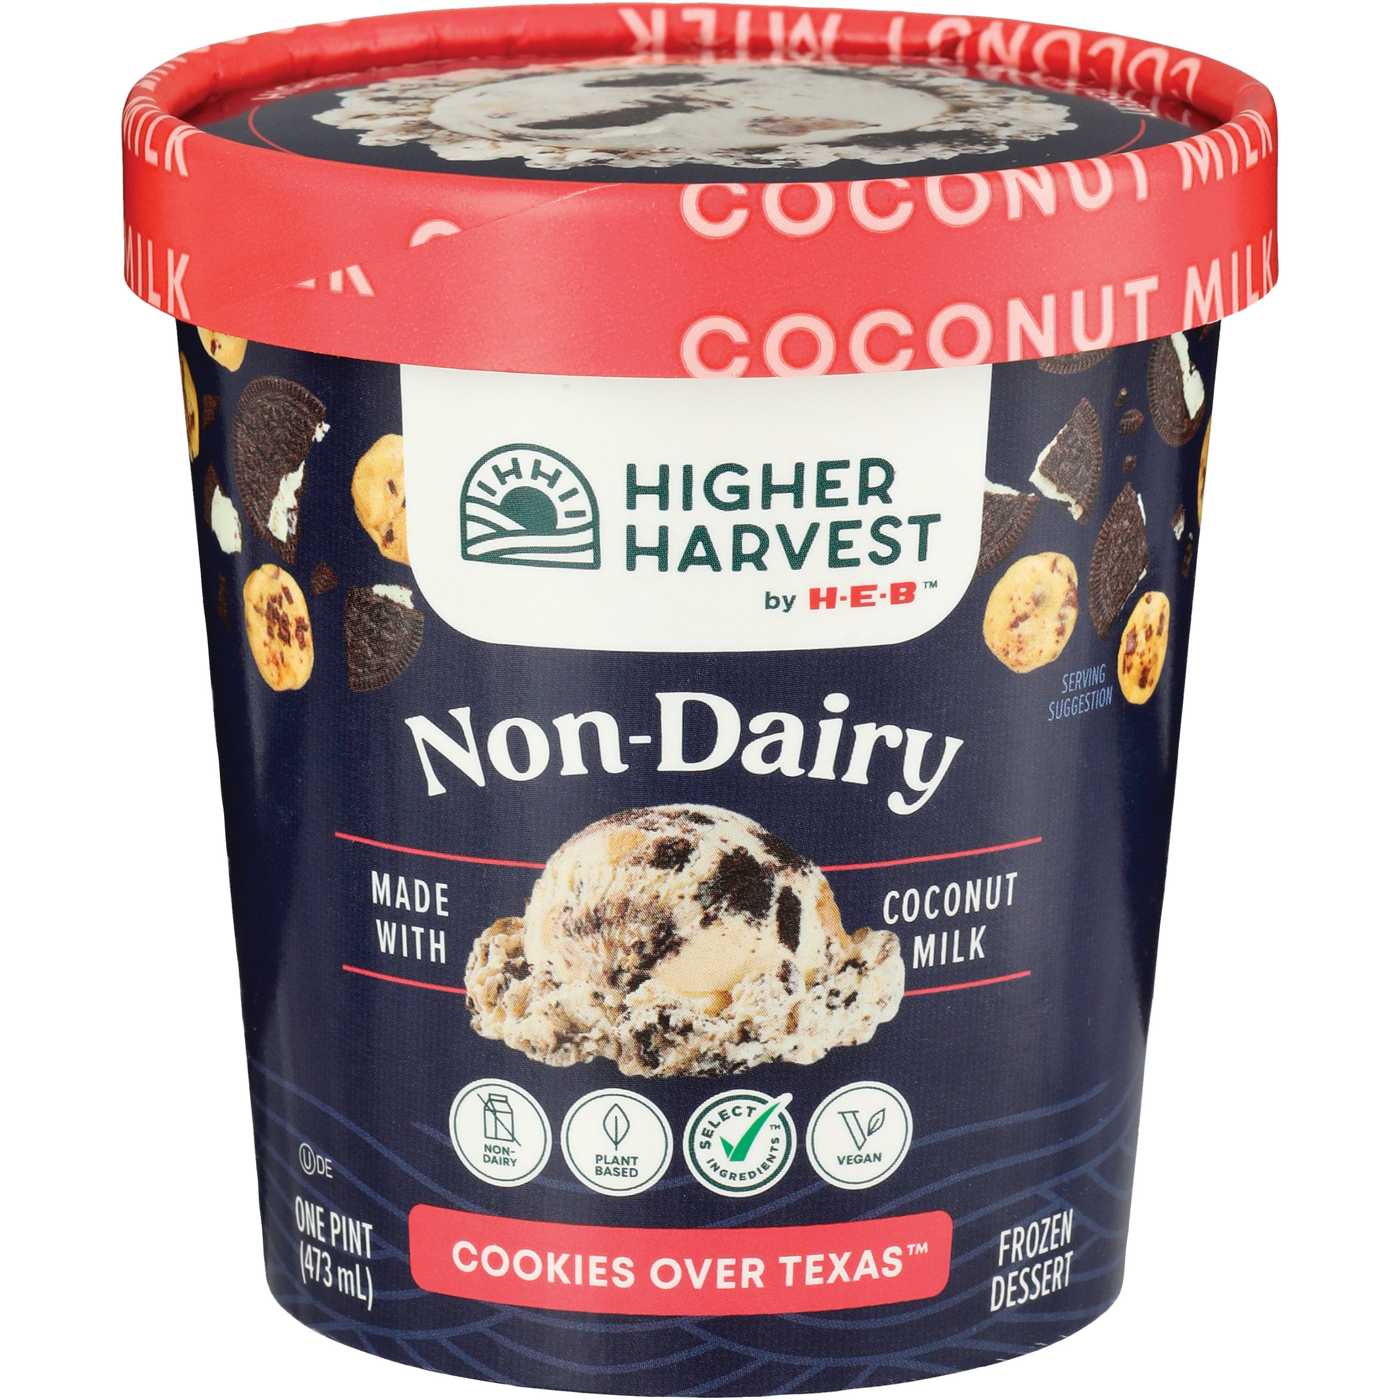 Higher Harvest by H-E-B Non-Dairy Frozen Dessert - Cookies Over Texas; image 1 of 2